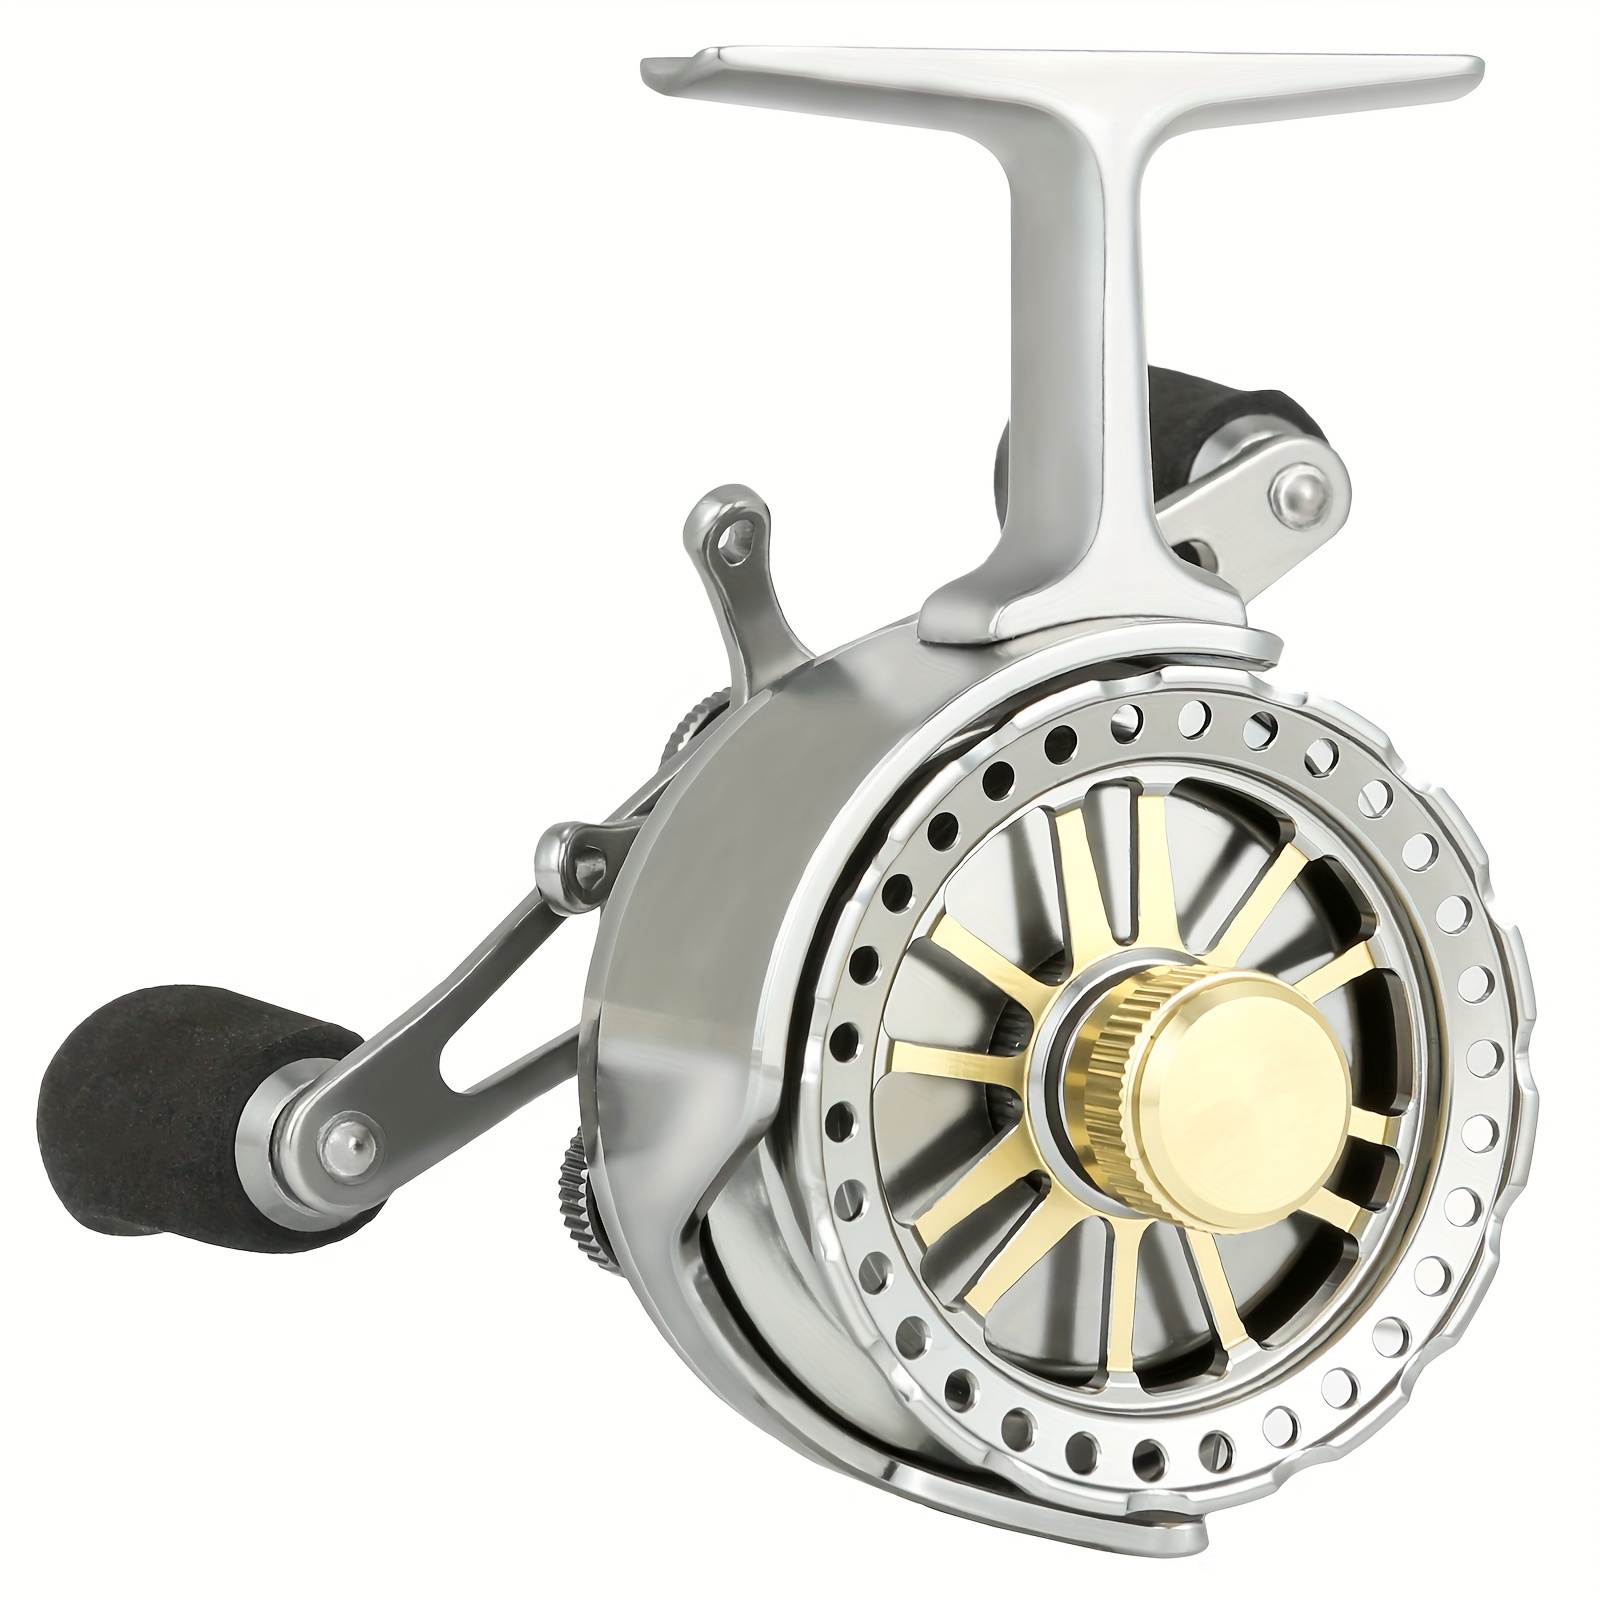 Aluminum Fly Fishing Reel Right Handed Smooth Ice Fishing Reels